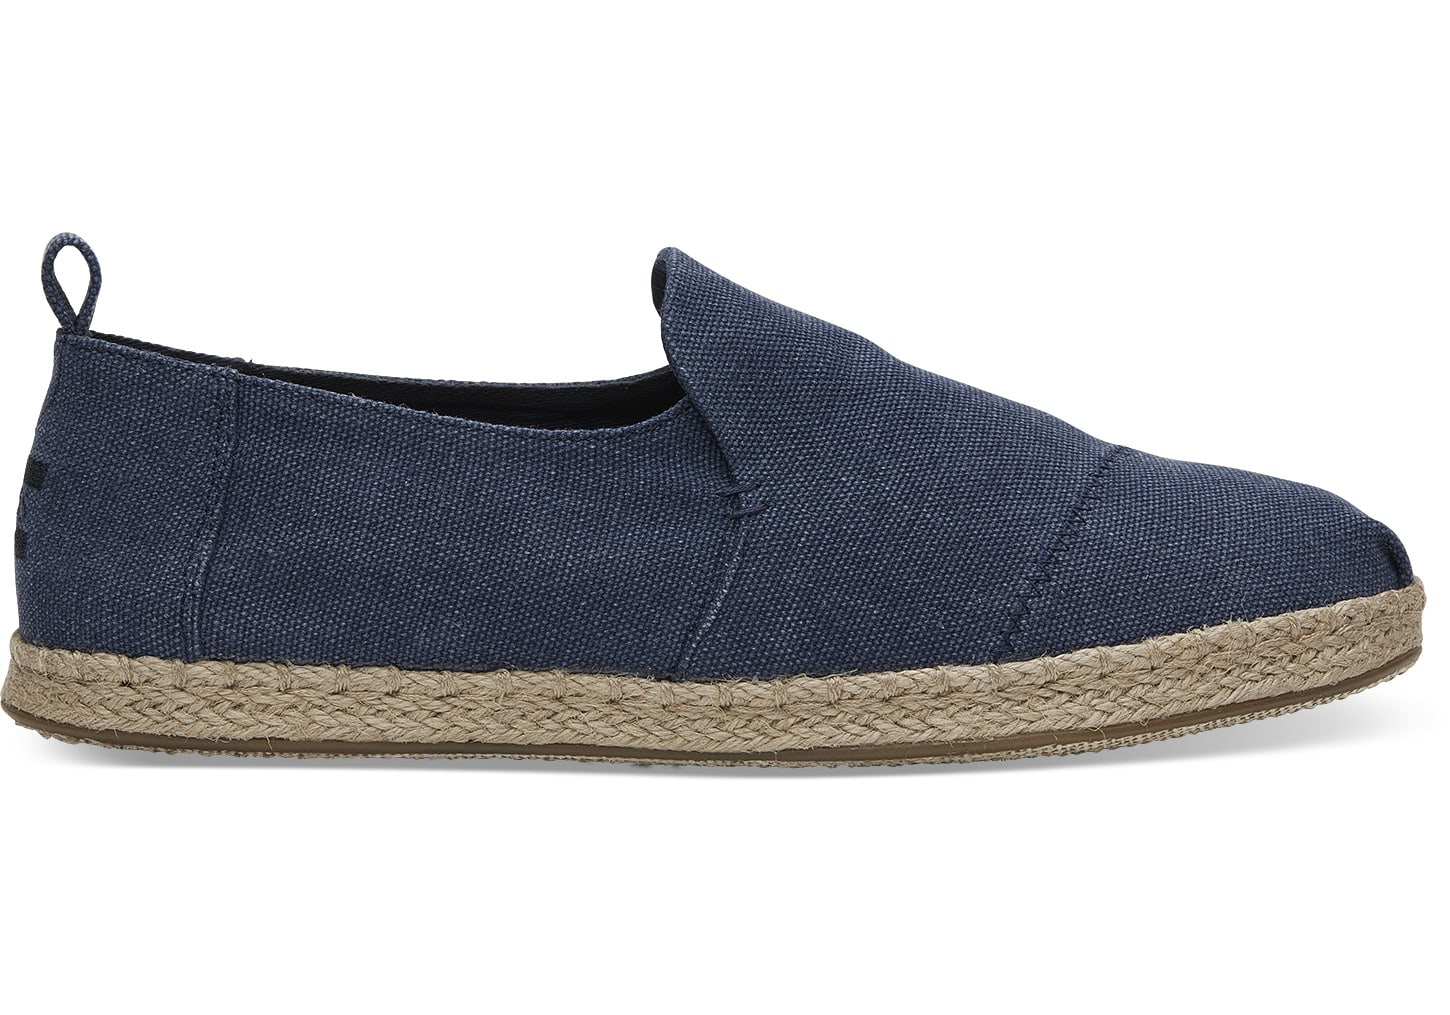 Details about  / TOMS Men/'s Navy Chambray Dorado Canvas Boat Shoes Sneakers Pumps